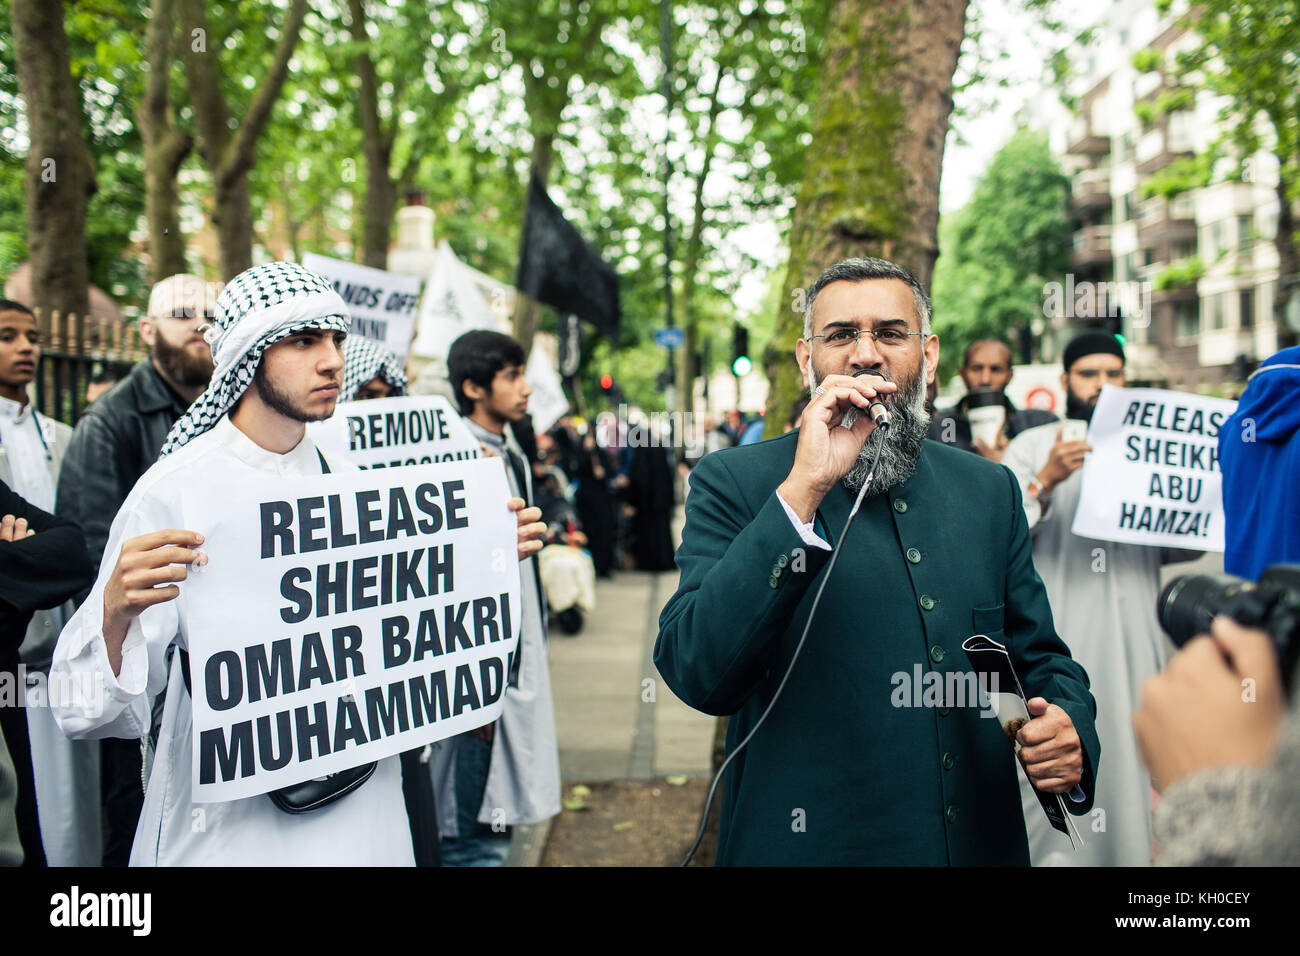 Several Muslim leaders did speeches outside the Regents Park Mosque at the “Hands of Sheikh Omar Bakri Muhammad” protest in London. Here the Muslim political activist Anjem Choudary. UK, 30/05 2014. Stock Photo